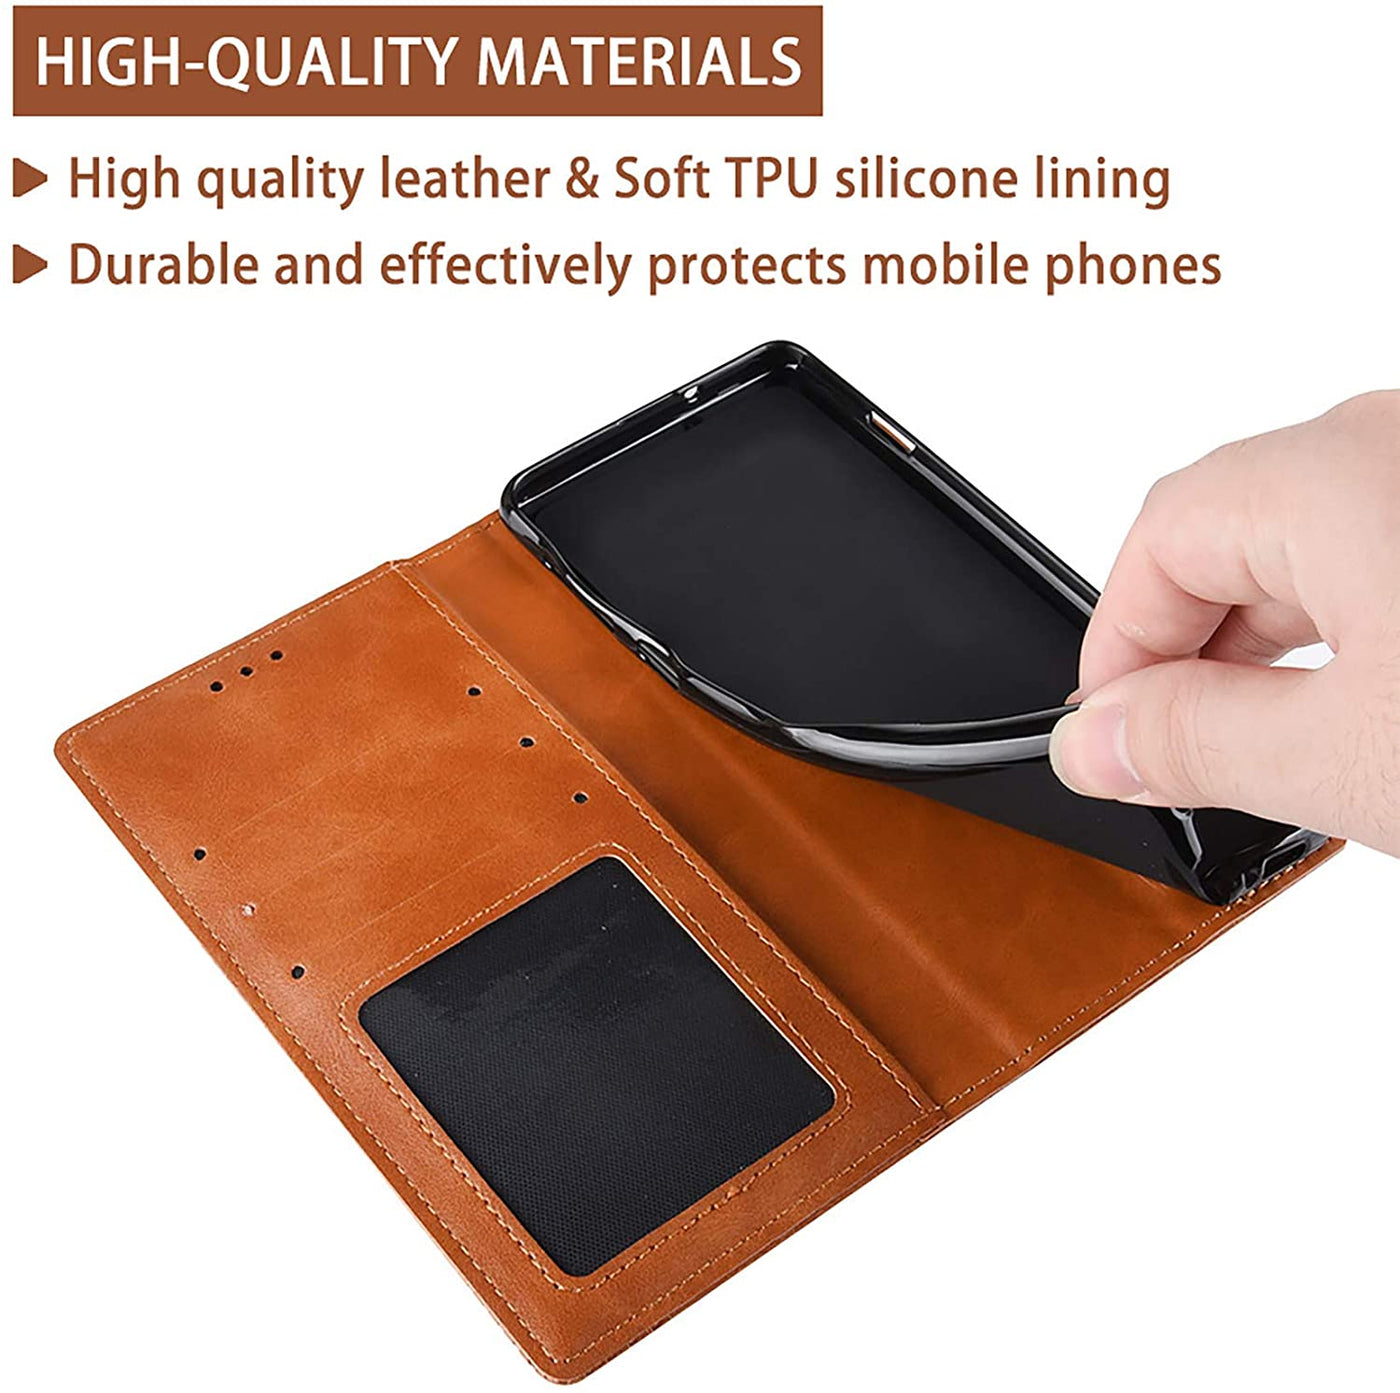 Samsung Galaxy S21 5G full body protection Leather Wallet flip case cover by Excelsior